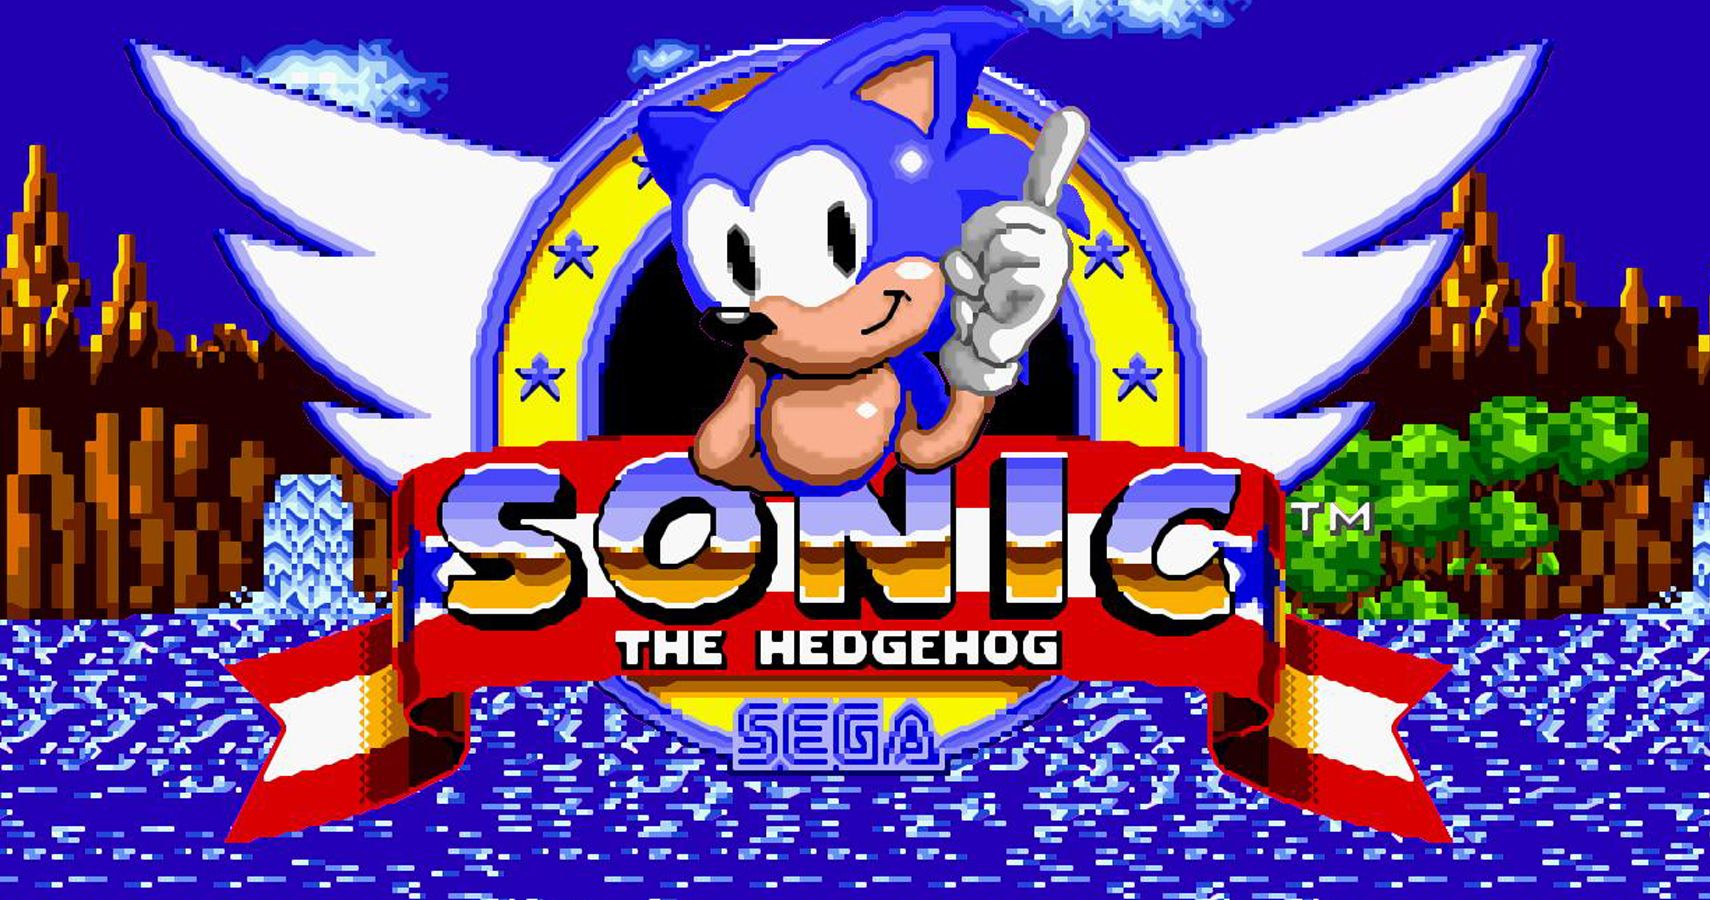 5 Classic Sonic The Hedgehog Games That Deserve A Remake (& 5 That Dont)